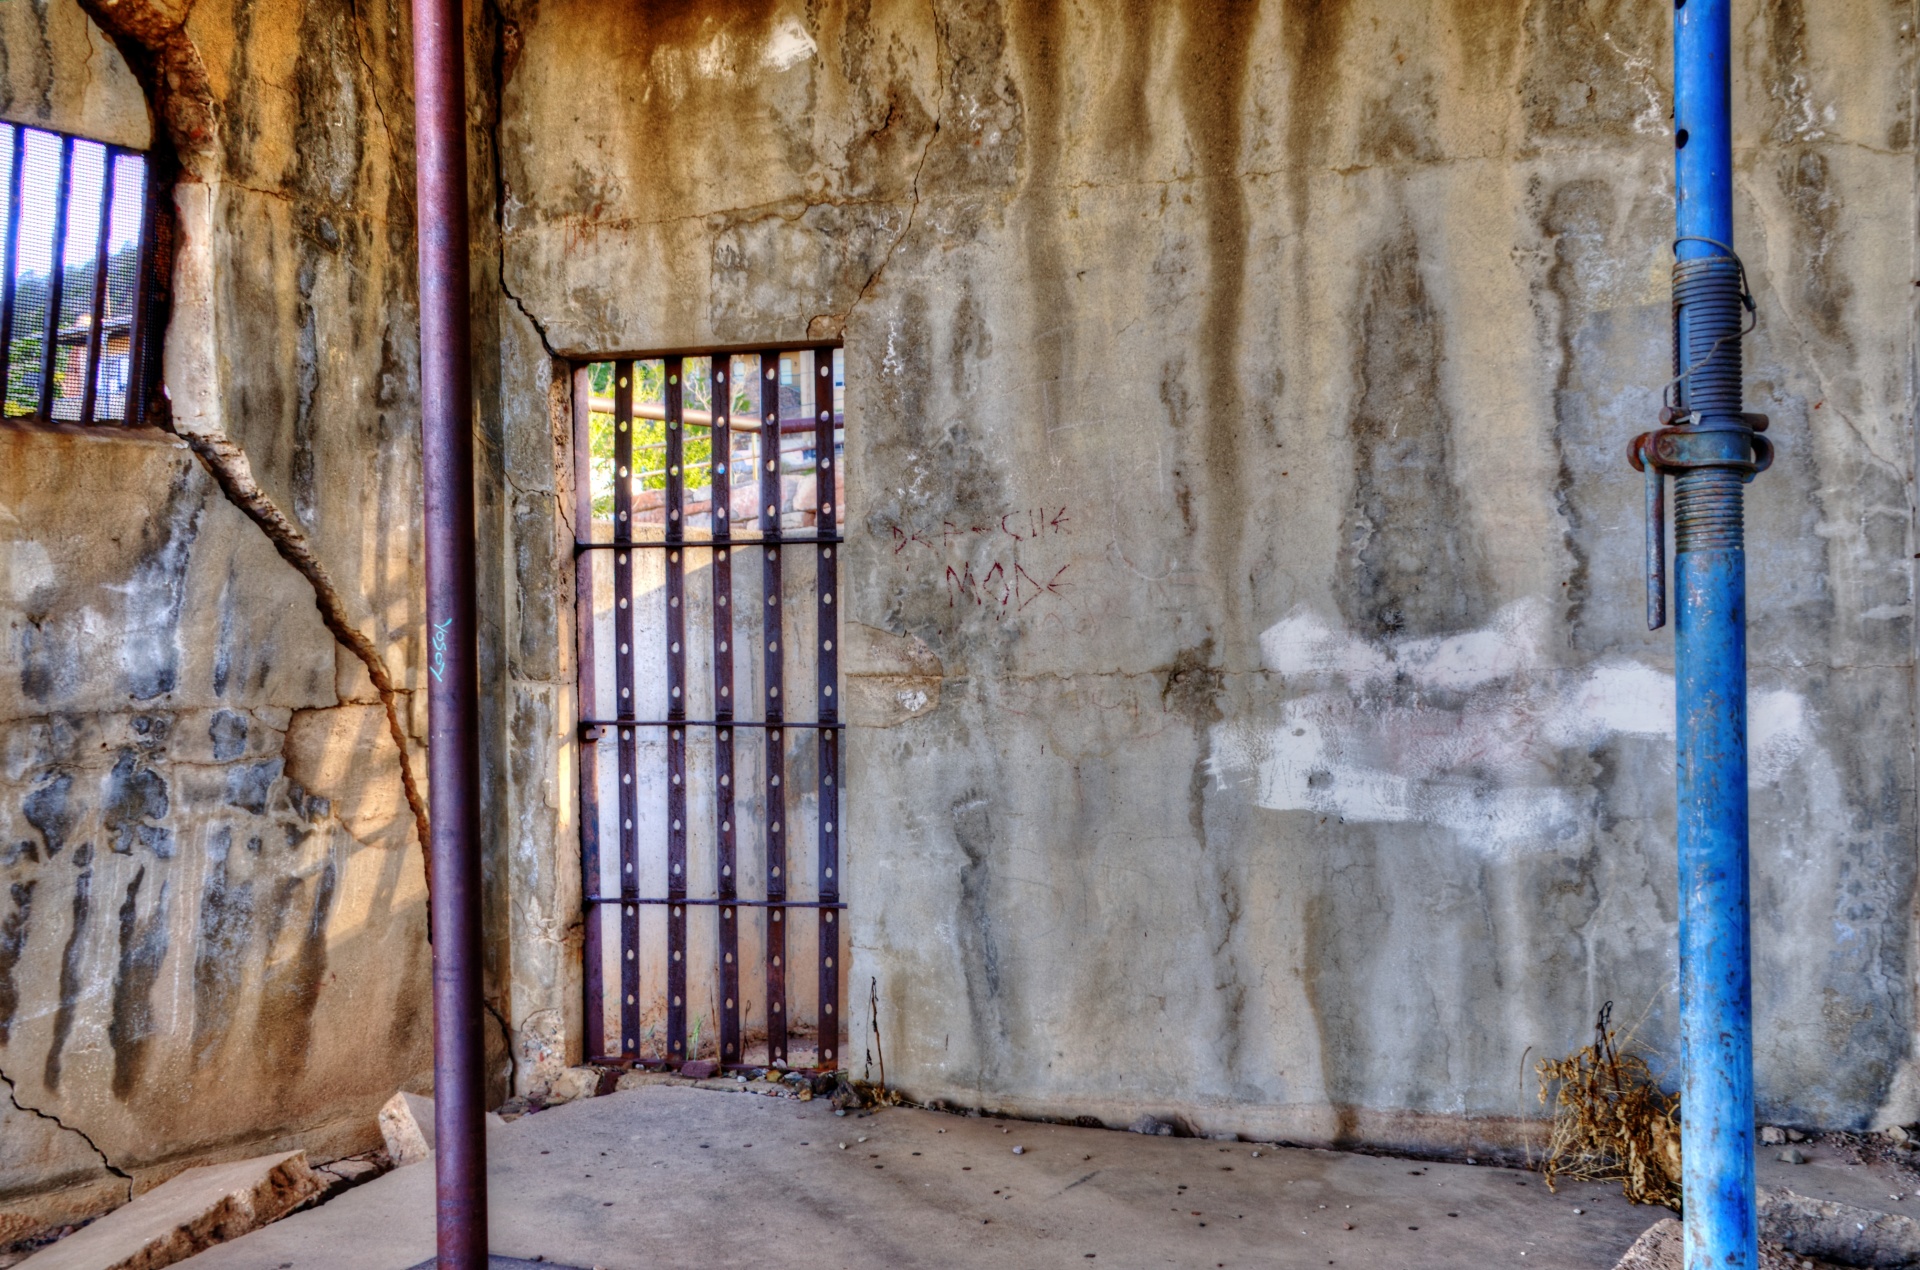 Jail Cell Ruins